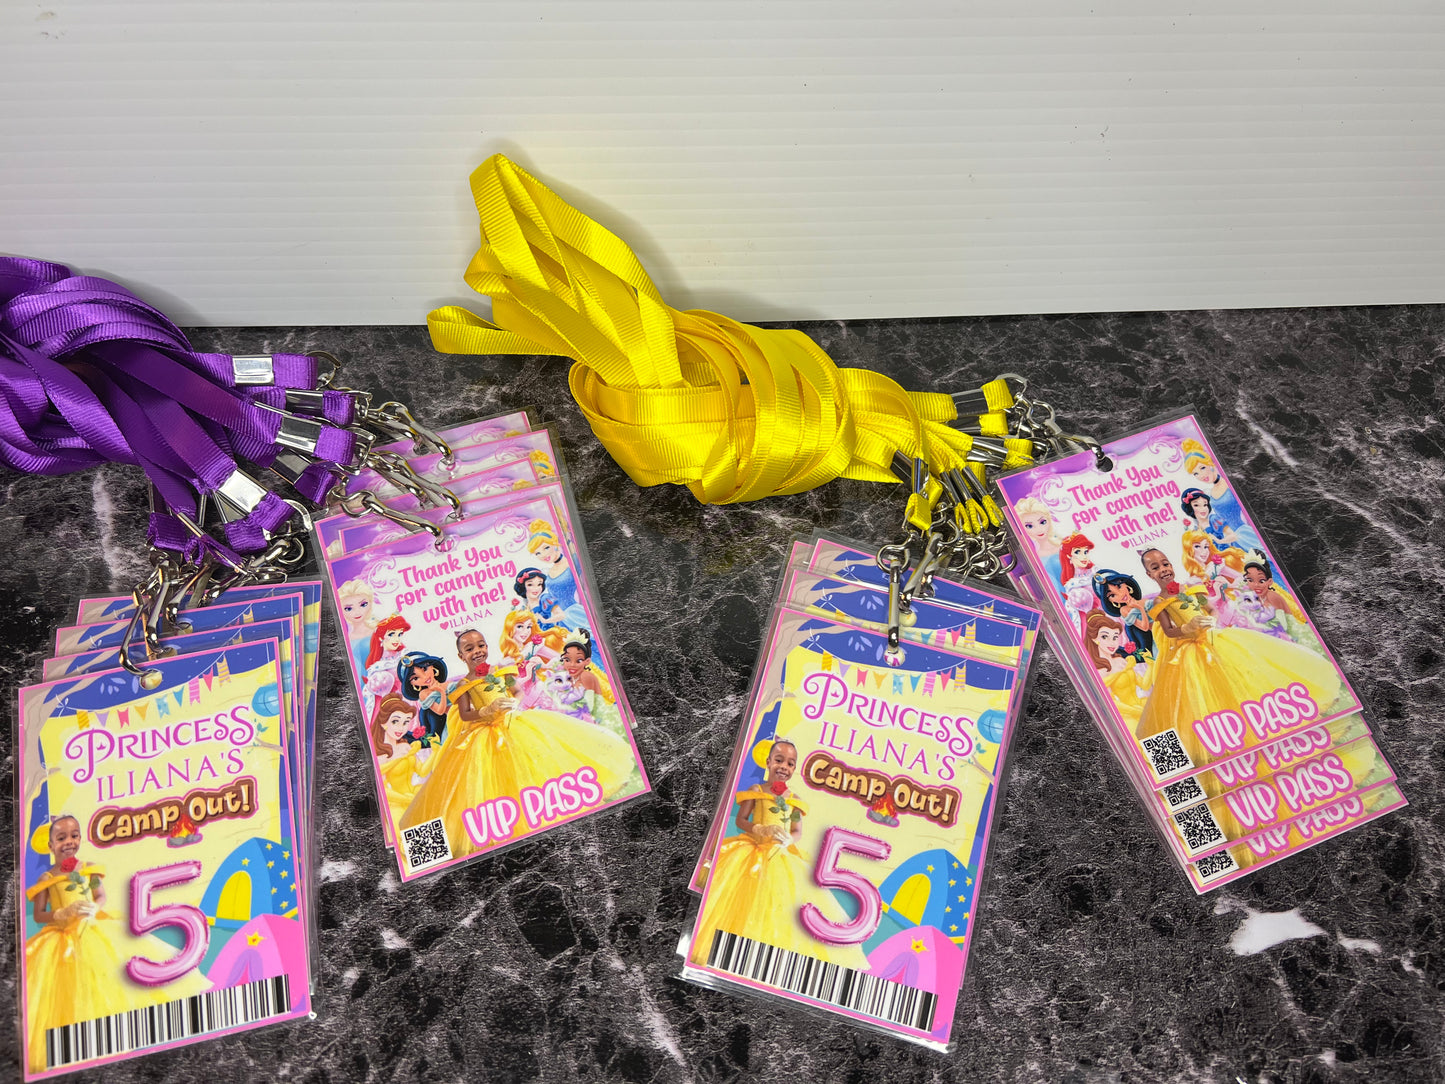 Exclusive VIP Party Passes